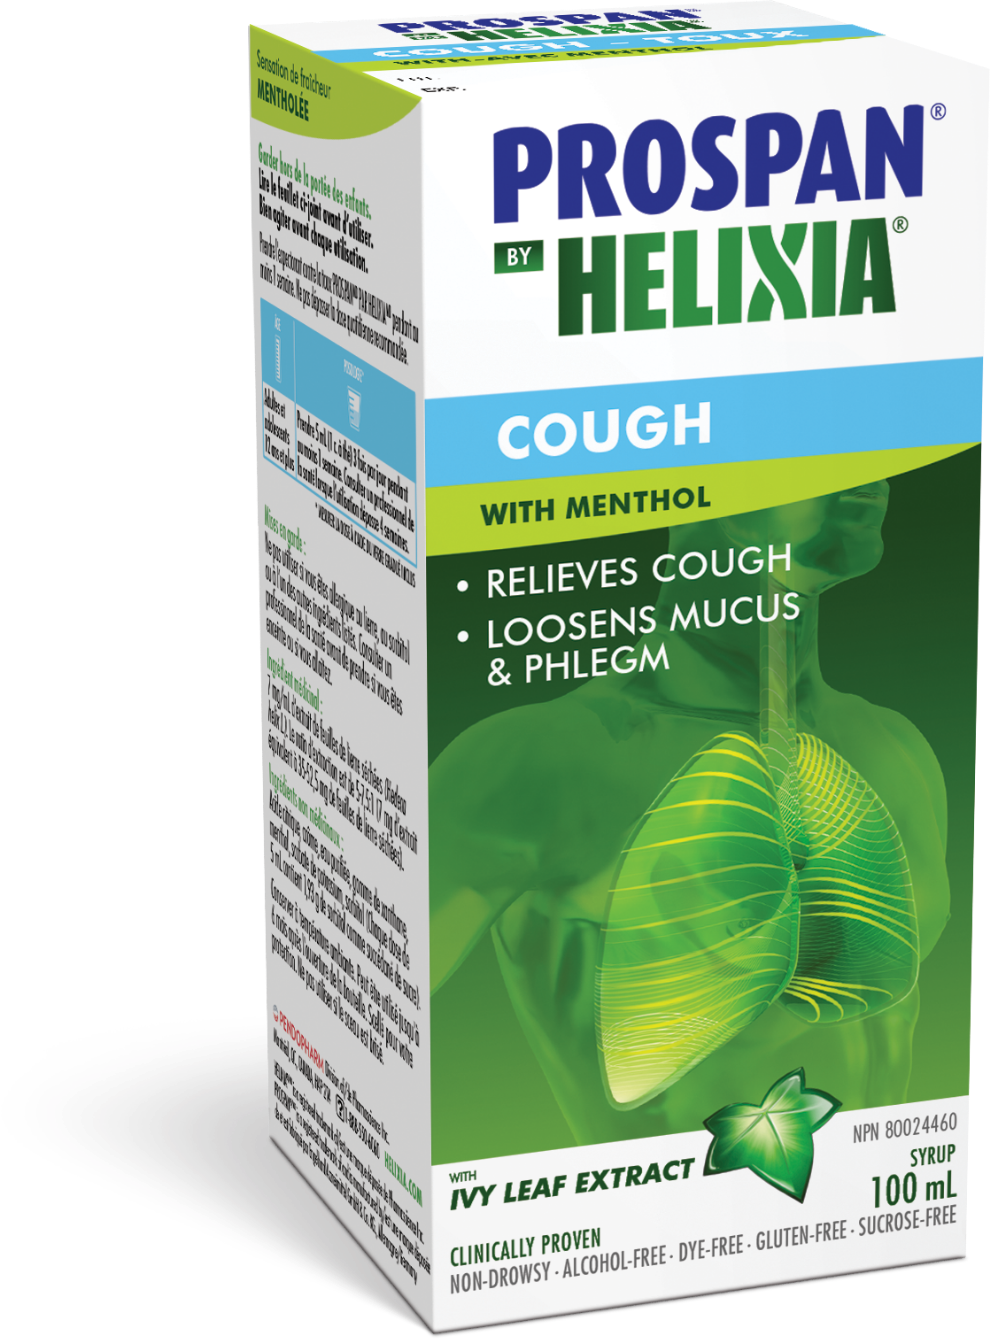  PROSPAN BY HELIXIA COUGH SYRUP